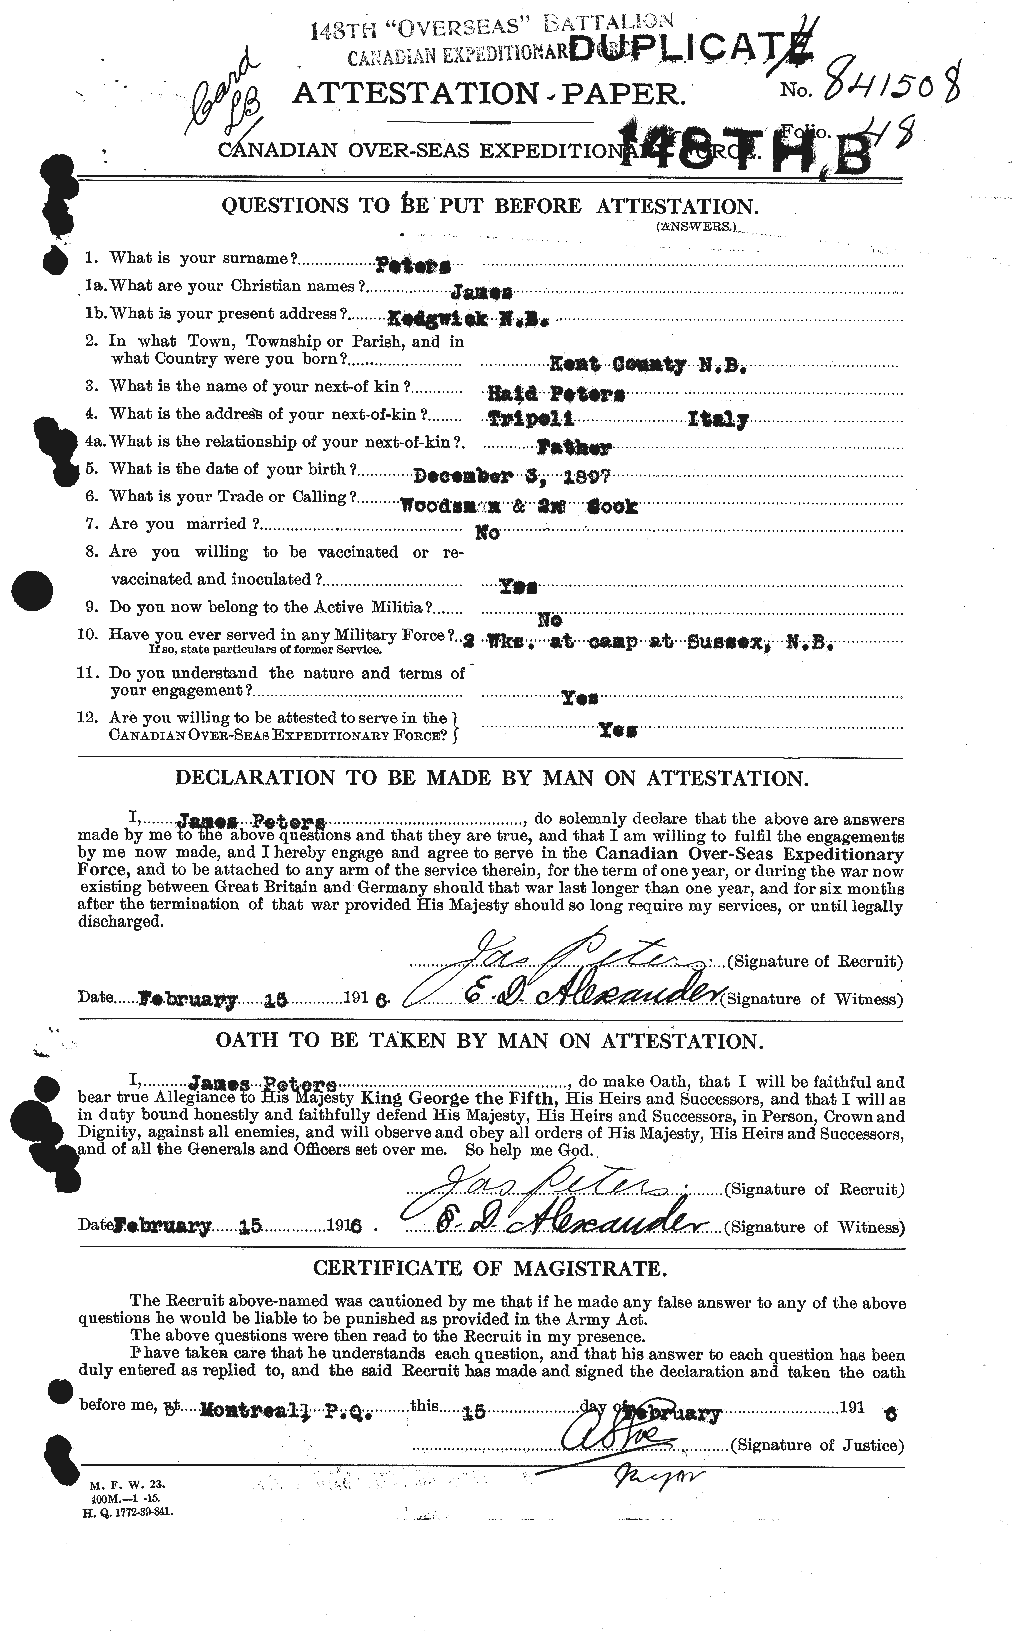 Personnel Records of the First World War - CEF 575523a